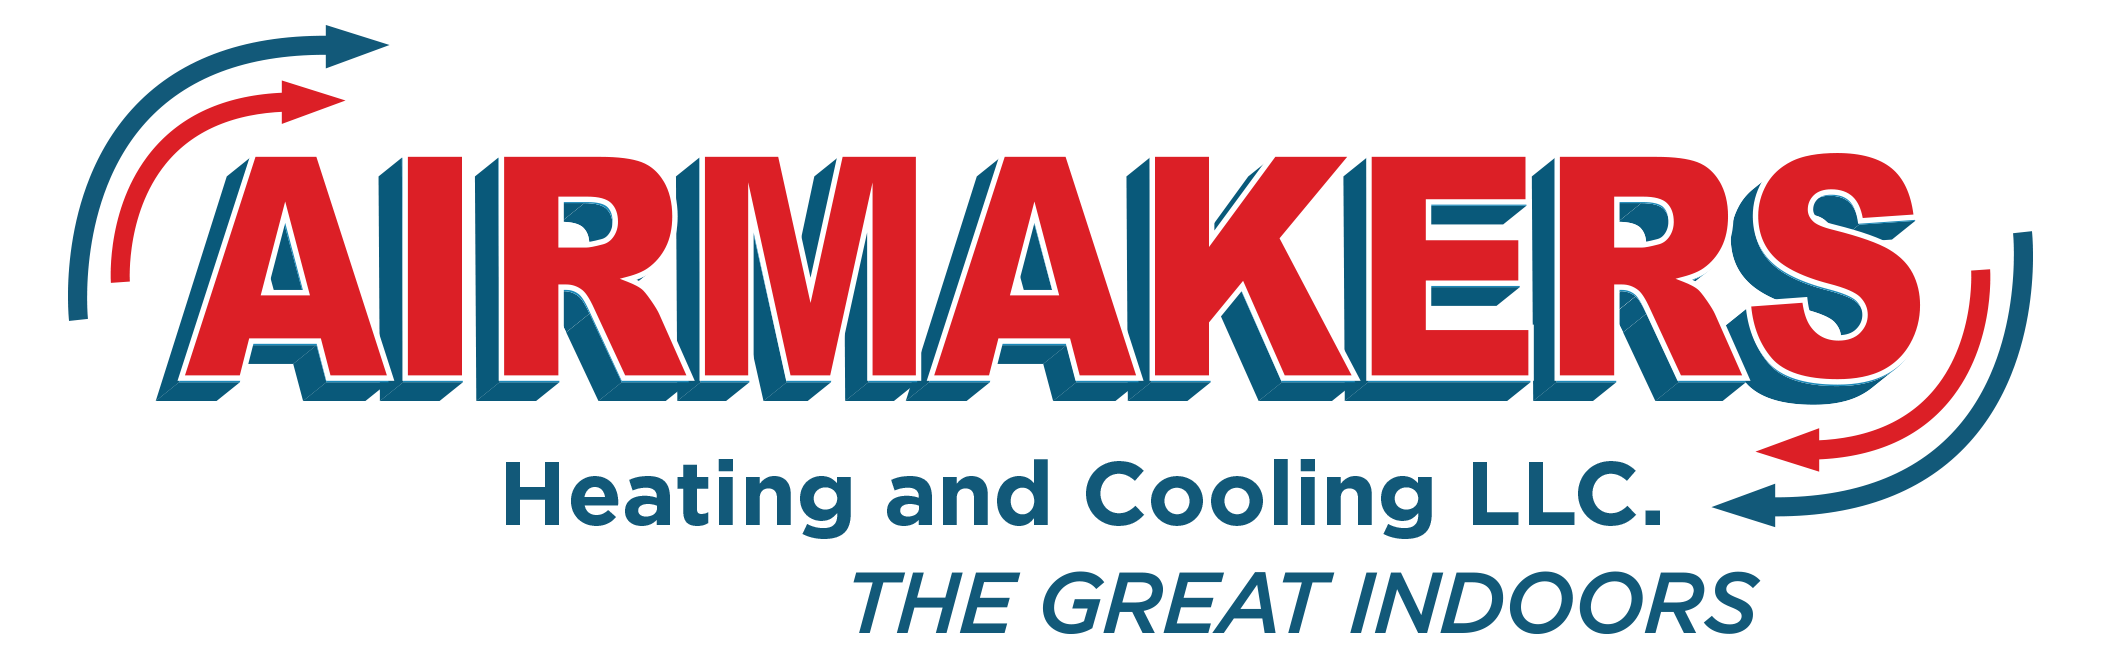 AirMakers Heating and Cooling, LLC